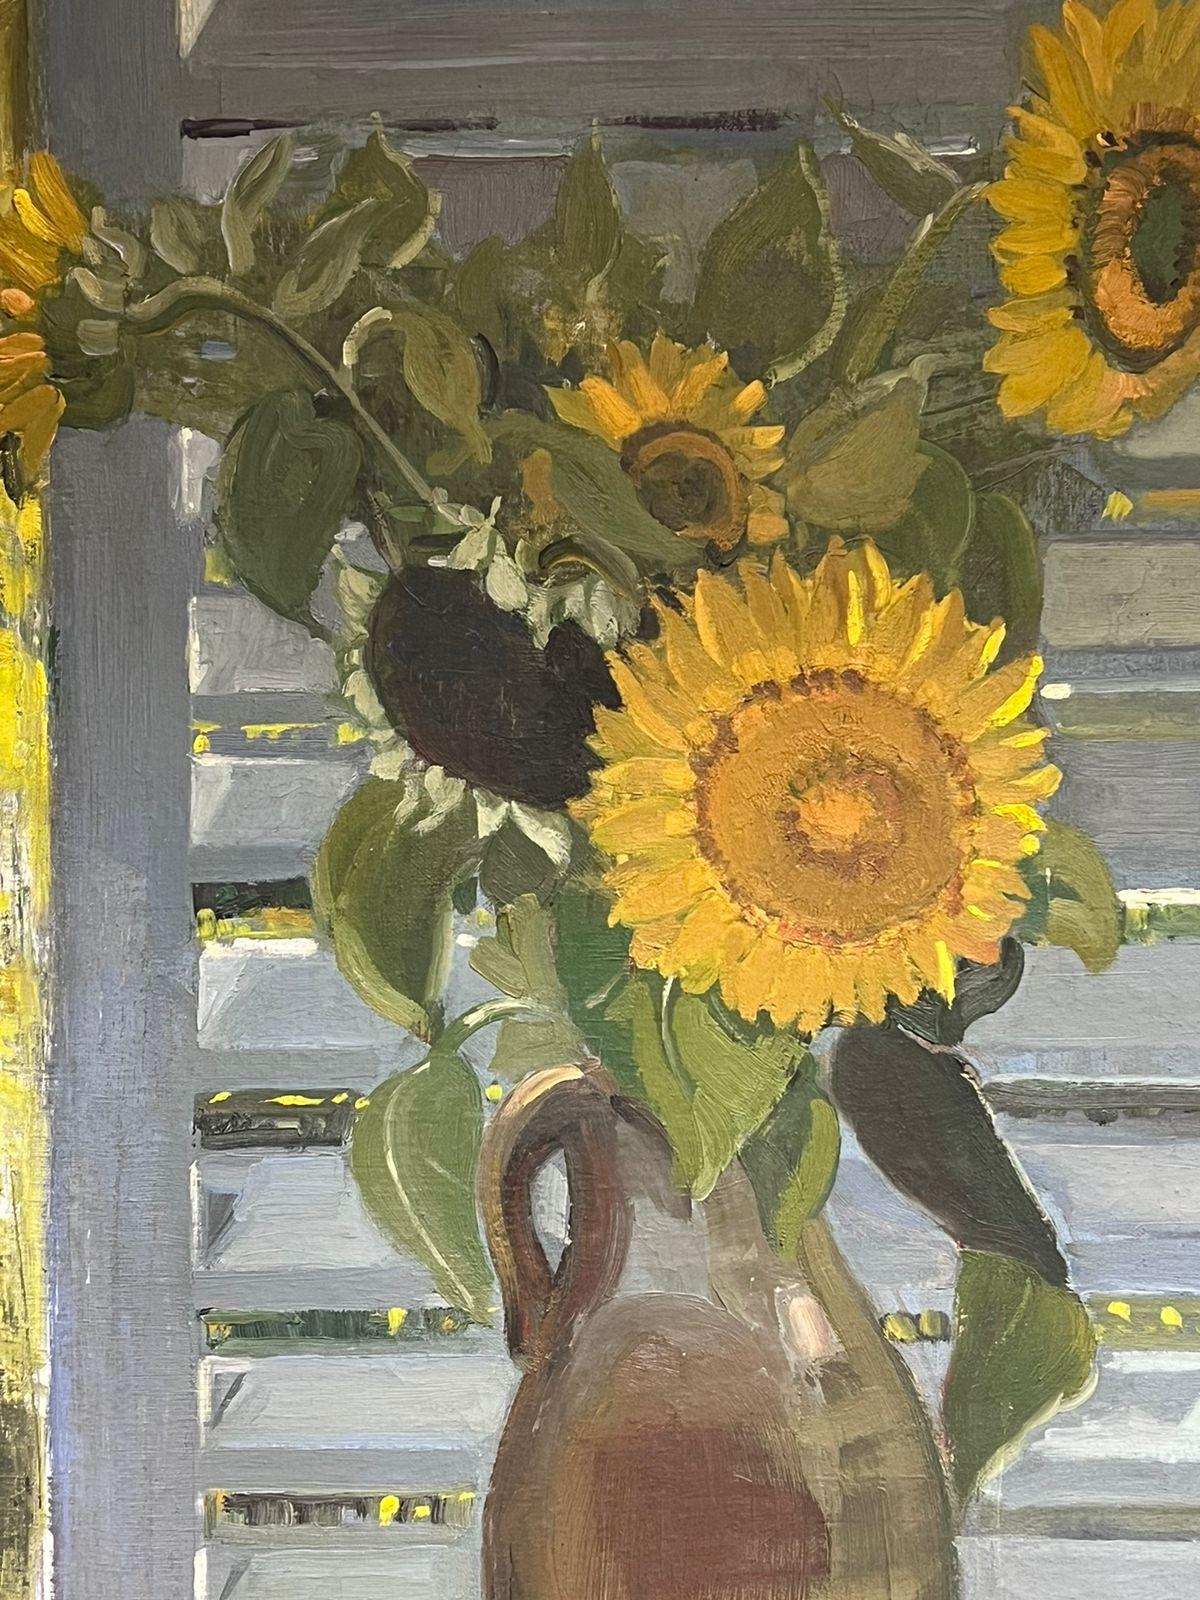 Sunflowers in the Window
by Y Blanchon, French circa 1930's period
signed oil on canvas, framed
framed: 47 x 30 inches
canvas: 45.5 x 29 inches
provenance: private collection, Normandy, France
condition: very good and sound condition